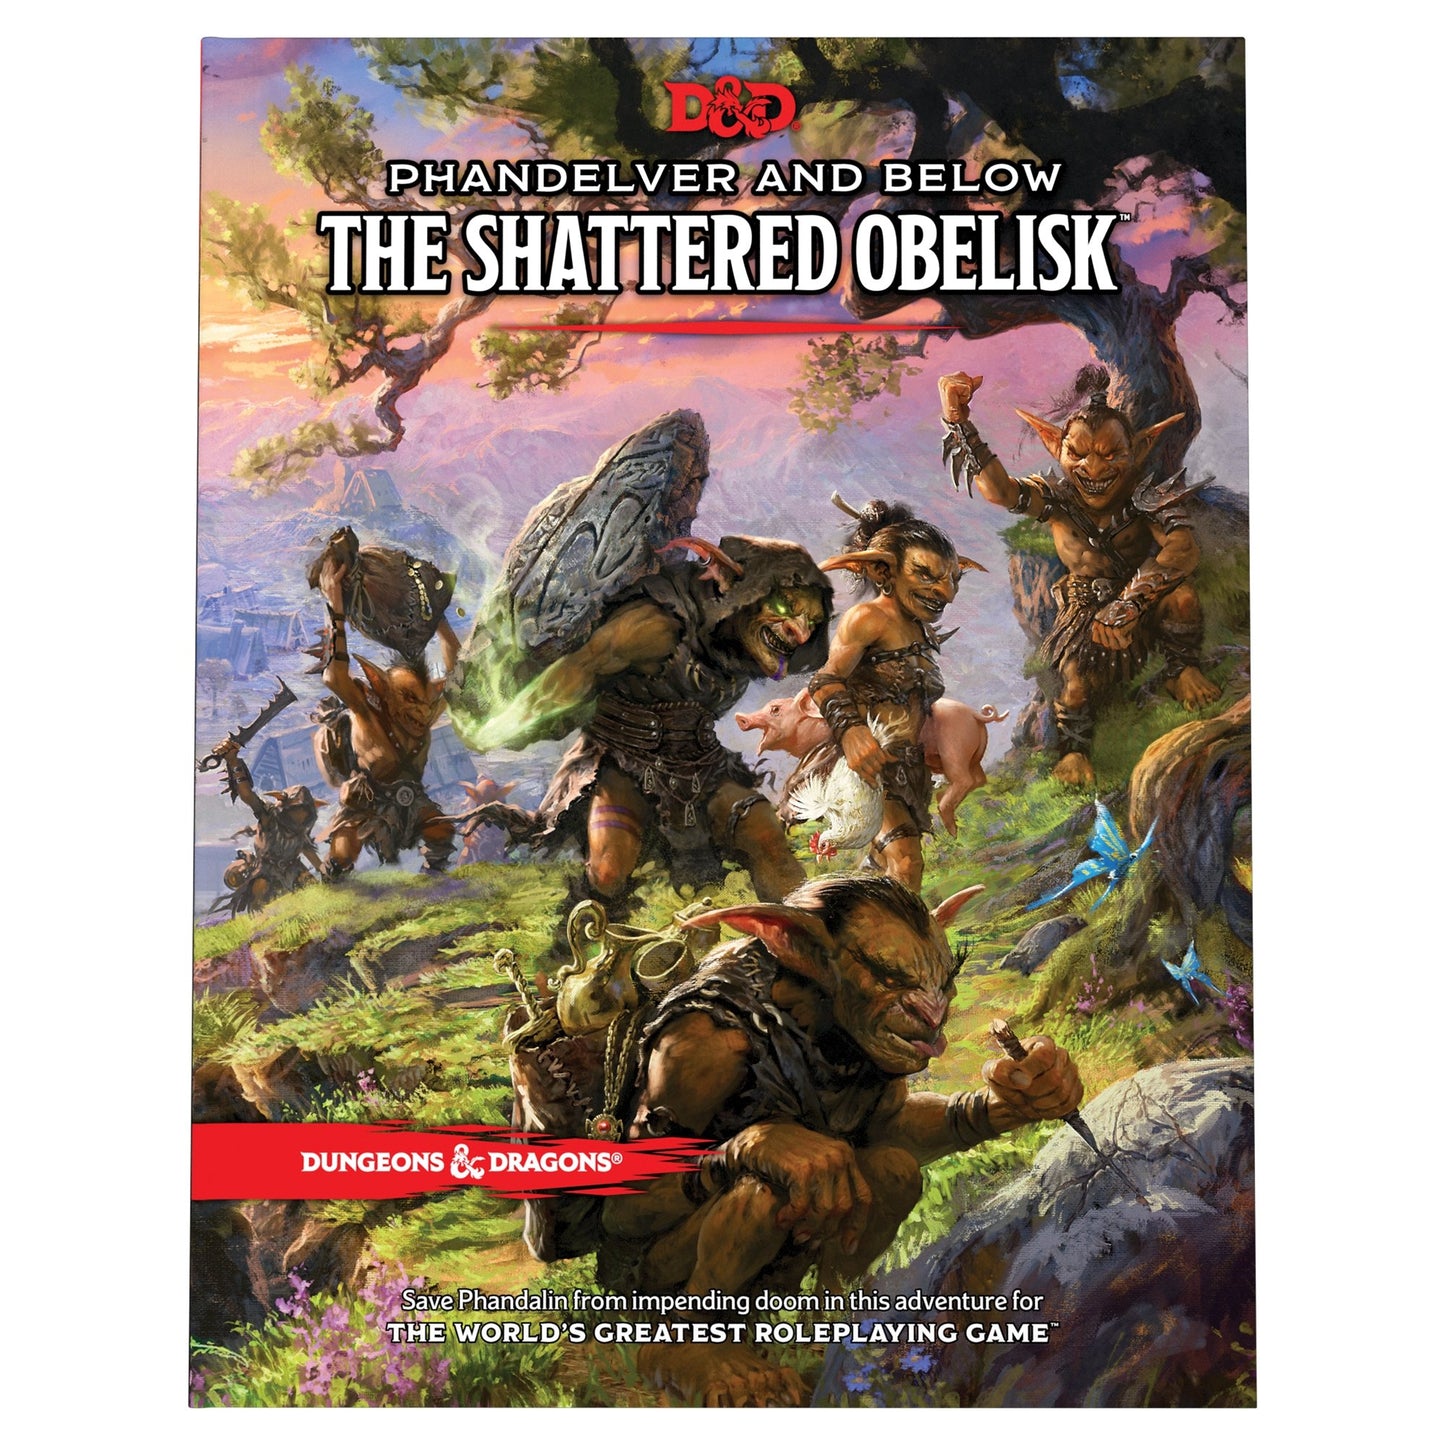 Dungeons & Dragons RPG: Phandelver And Below - The Shattered Obelisk (Preorder) - The Compleat Strategist